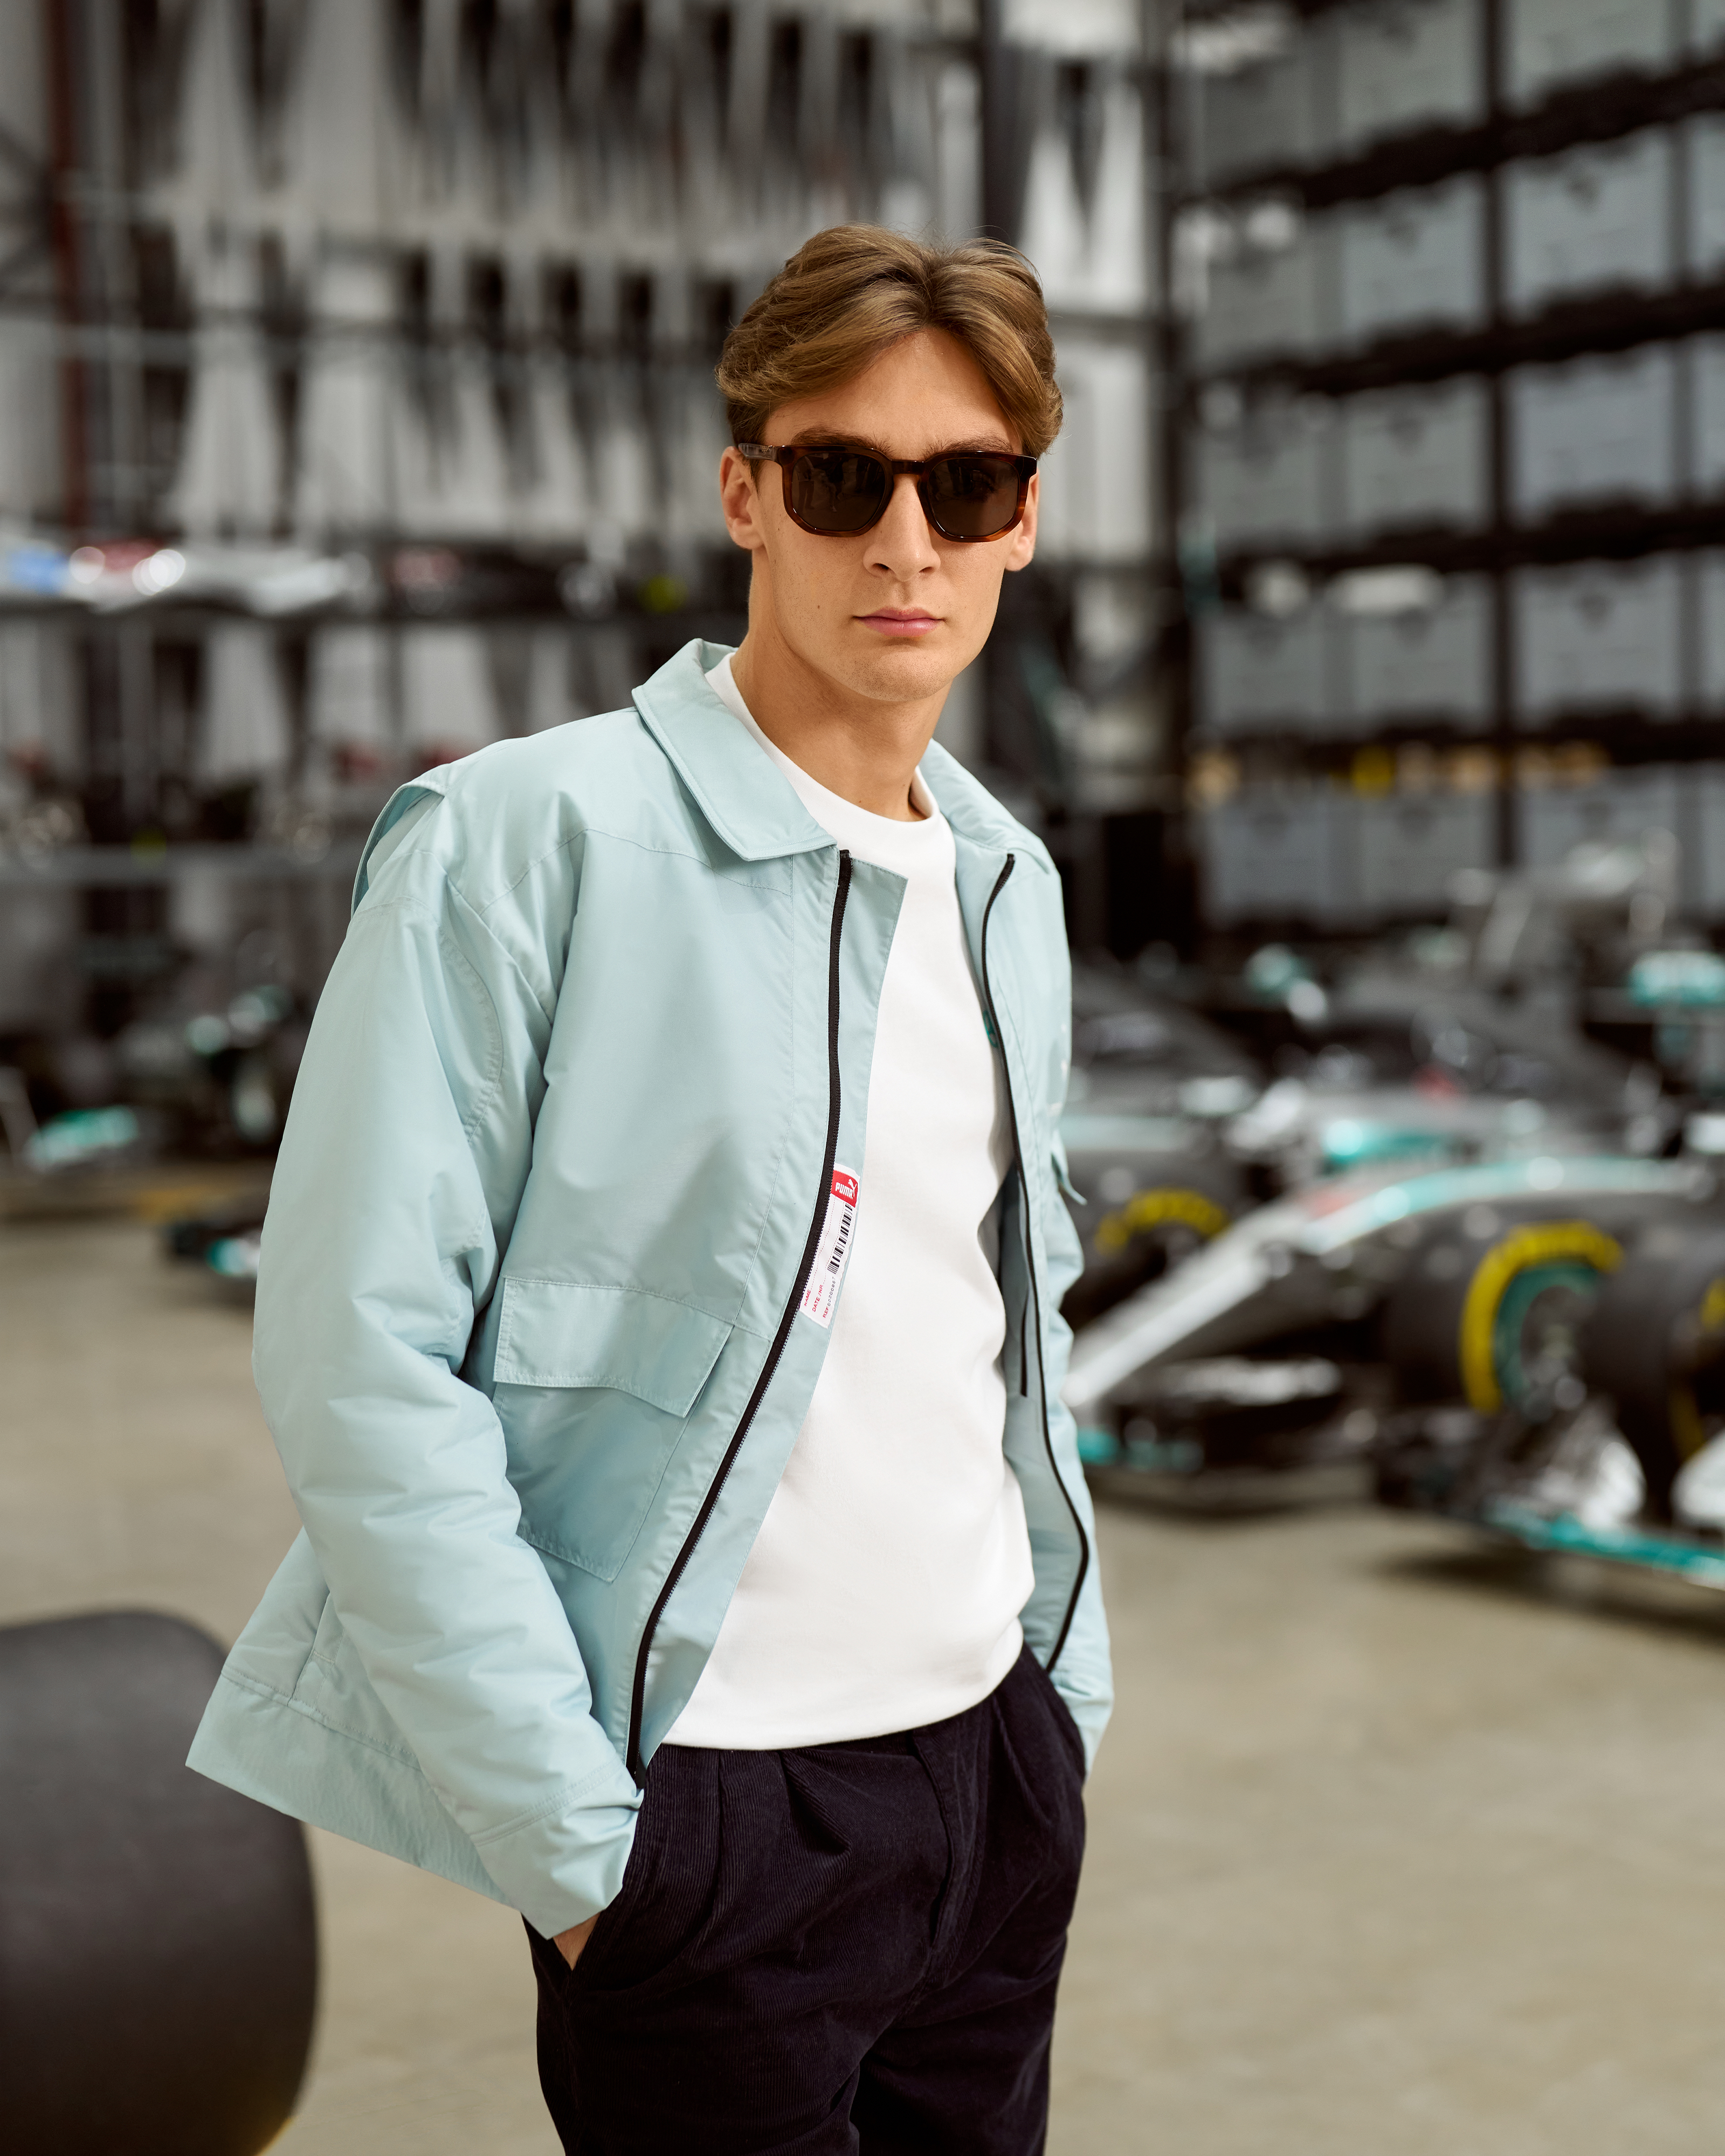 Fan Jackets | Official Mercedes-AMG F1 Store